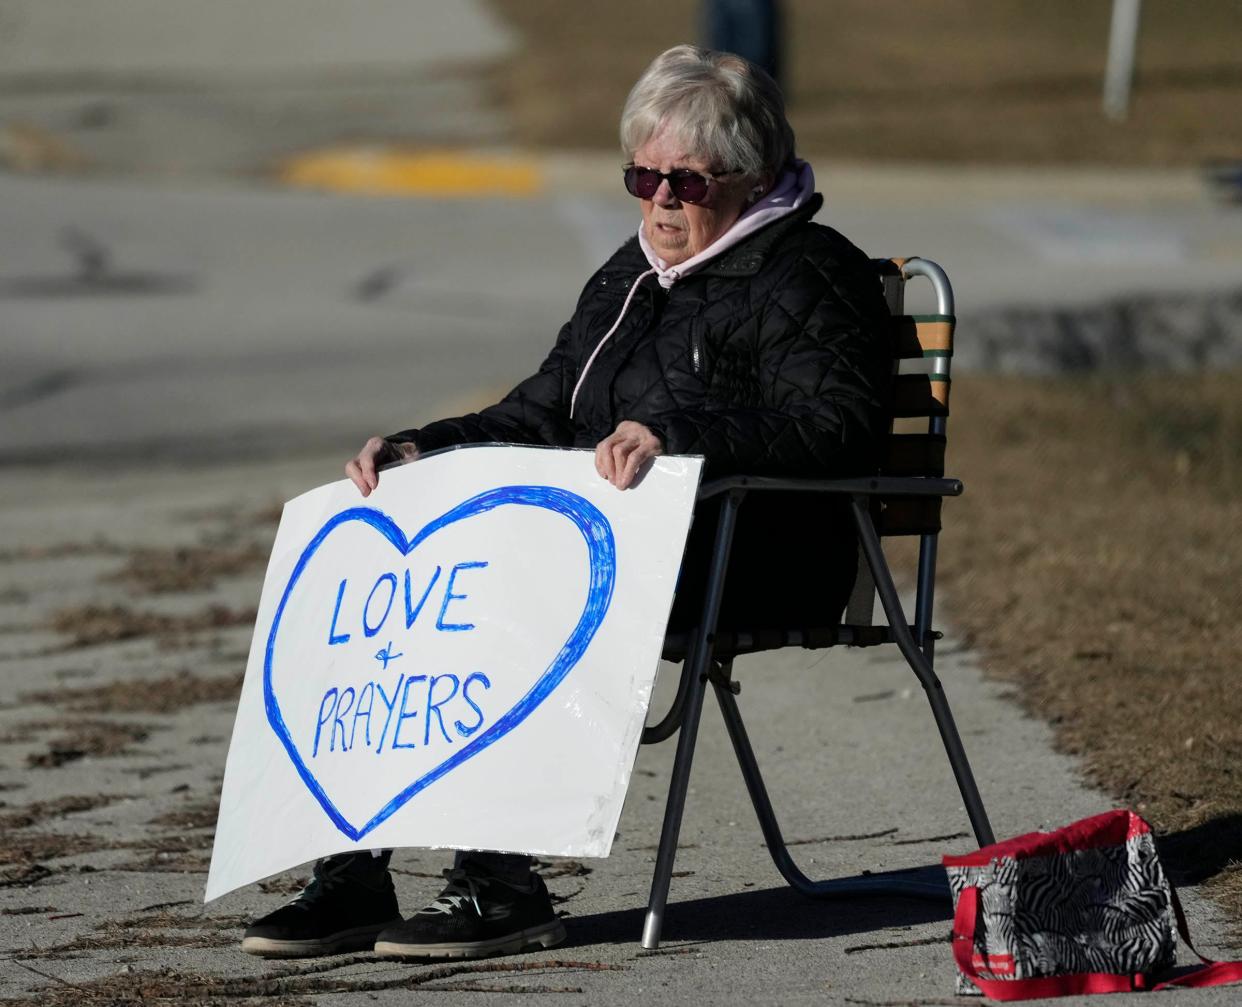 “We’ve come to too many of these”, said Bonnie Bruhn, of West Allis, referring to the third Milwaukee police officer funeral she's been to as she holds a sign outside Elmbrook Church during the funeral for Milwaukee police officer Peter Jerving in Brookfield on Monday, Feb. 13, 2023.